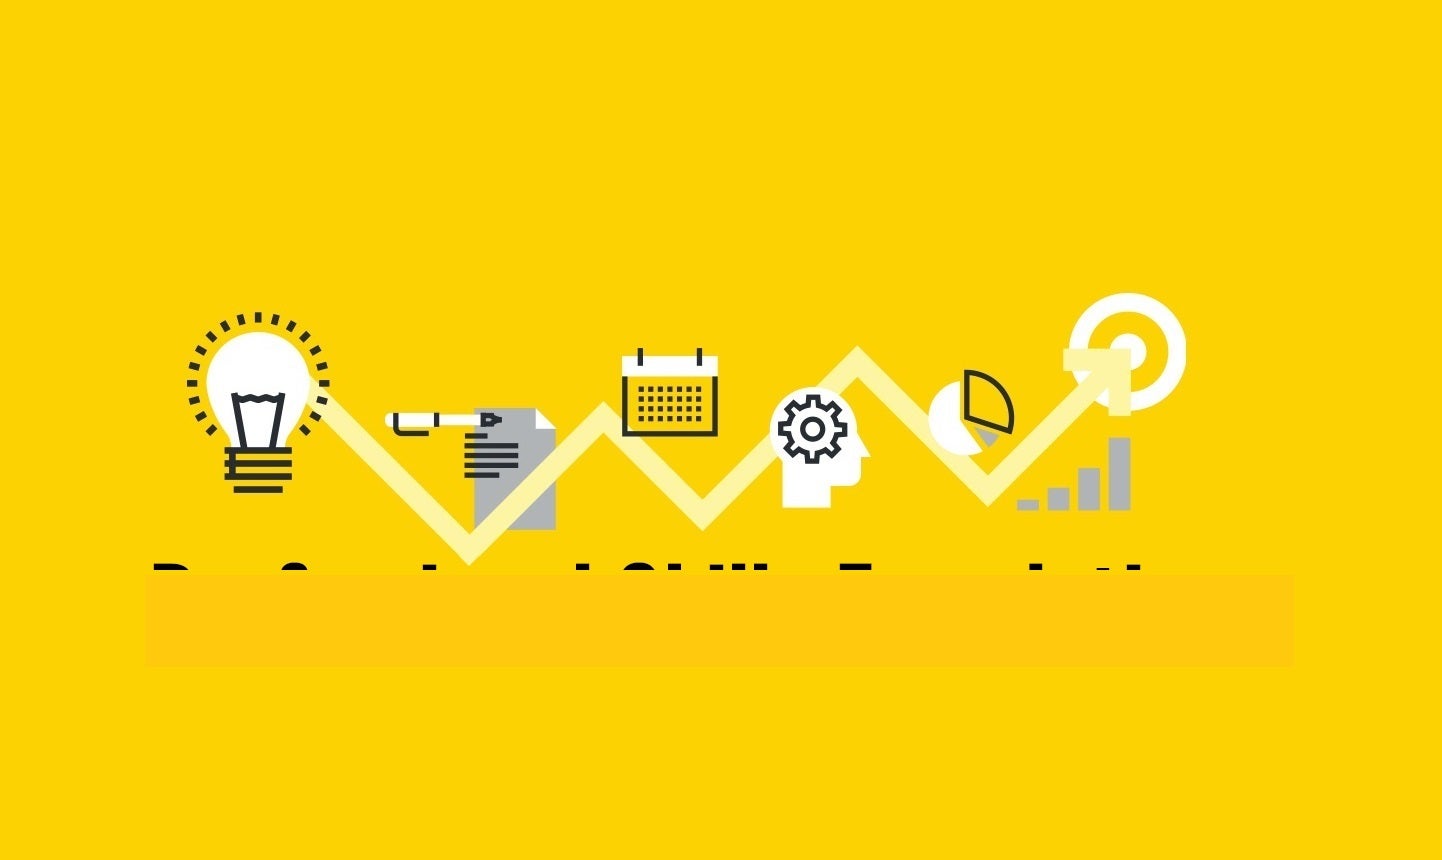 A yellow graphic with a lightbulb and other work related small icons